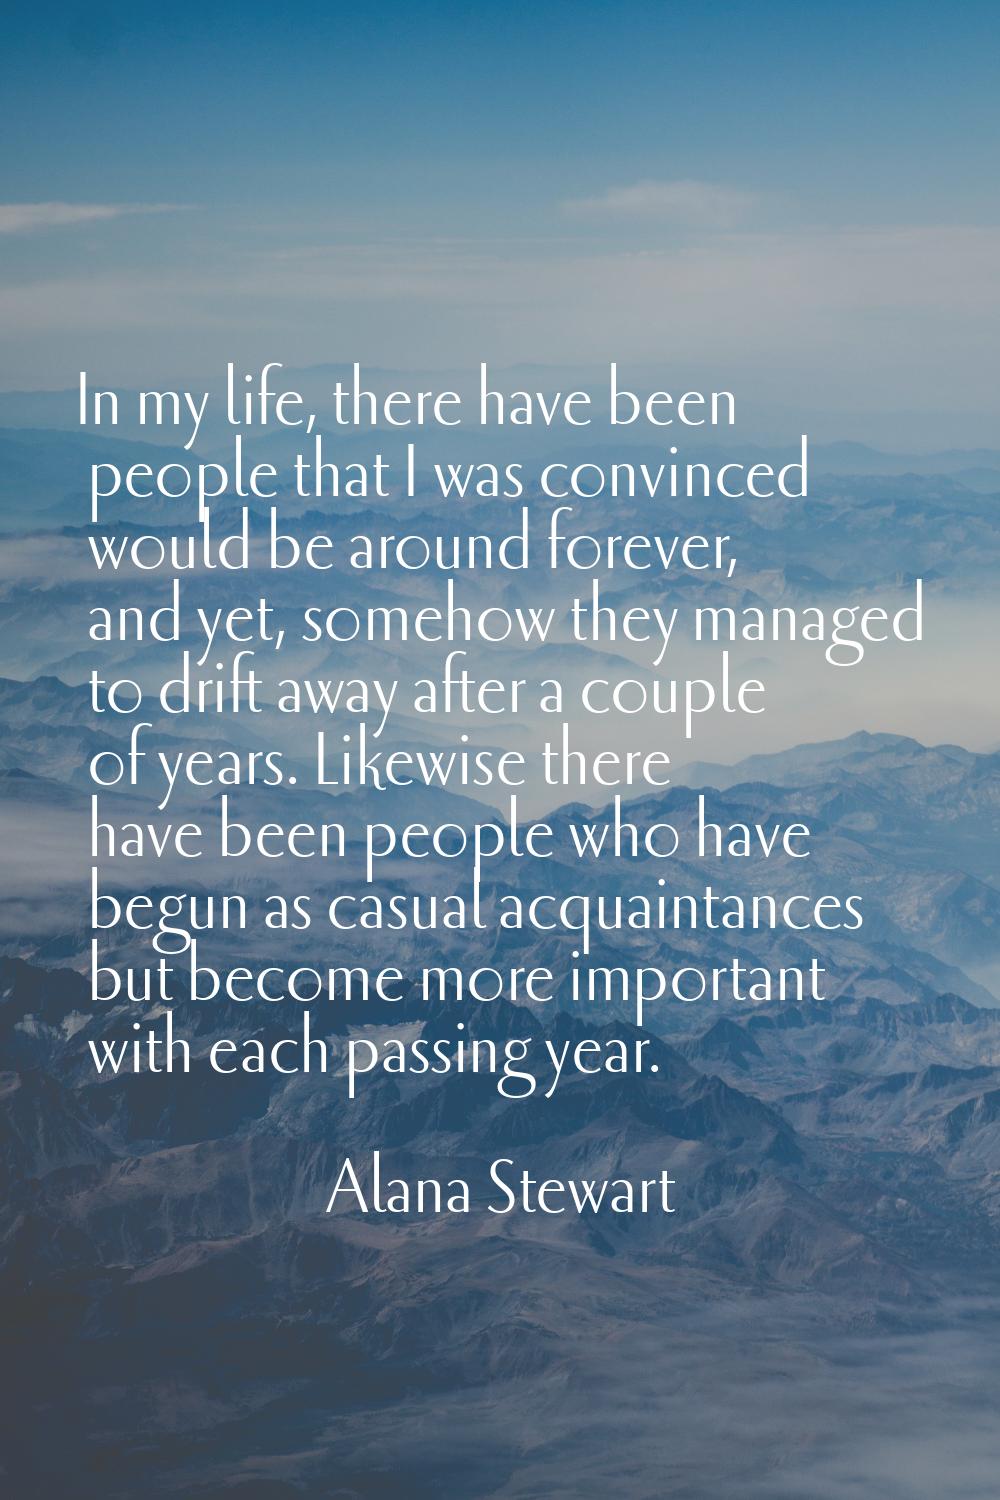 In my life, there have been people that I was convinced would be around forever, and yet, somehow t